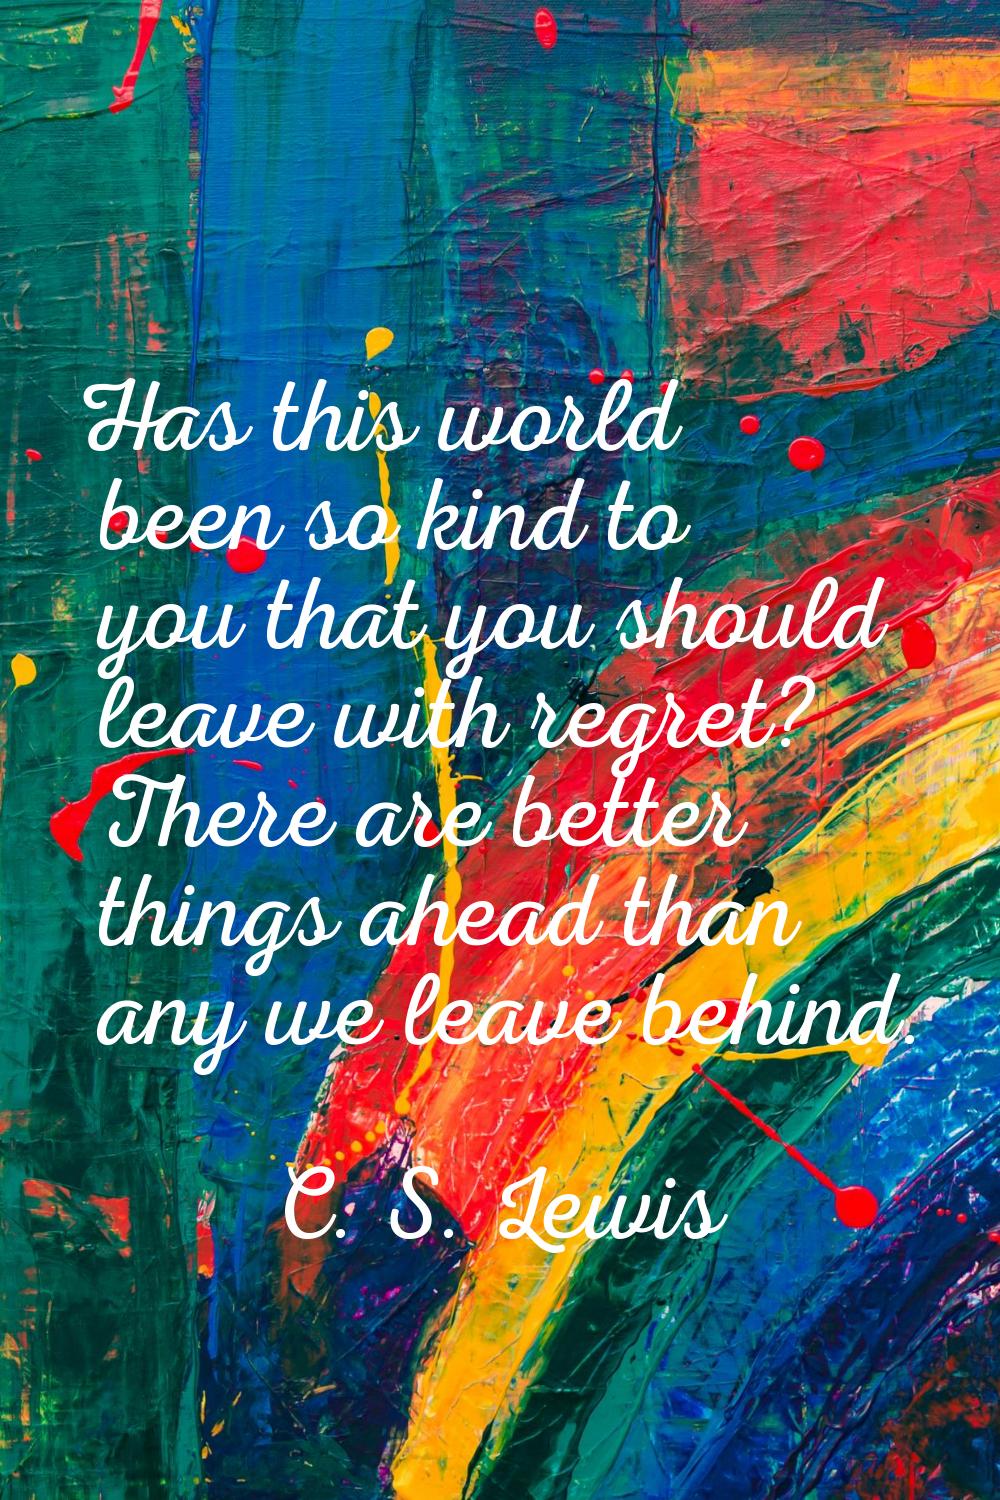 Has this world been so kind to you that you should leave with regret? There are better things ahead